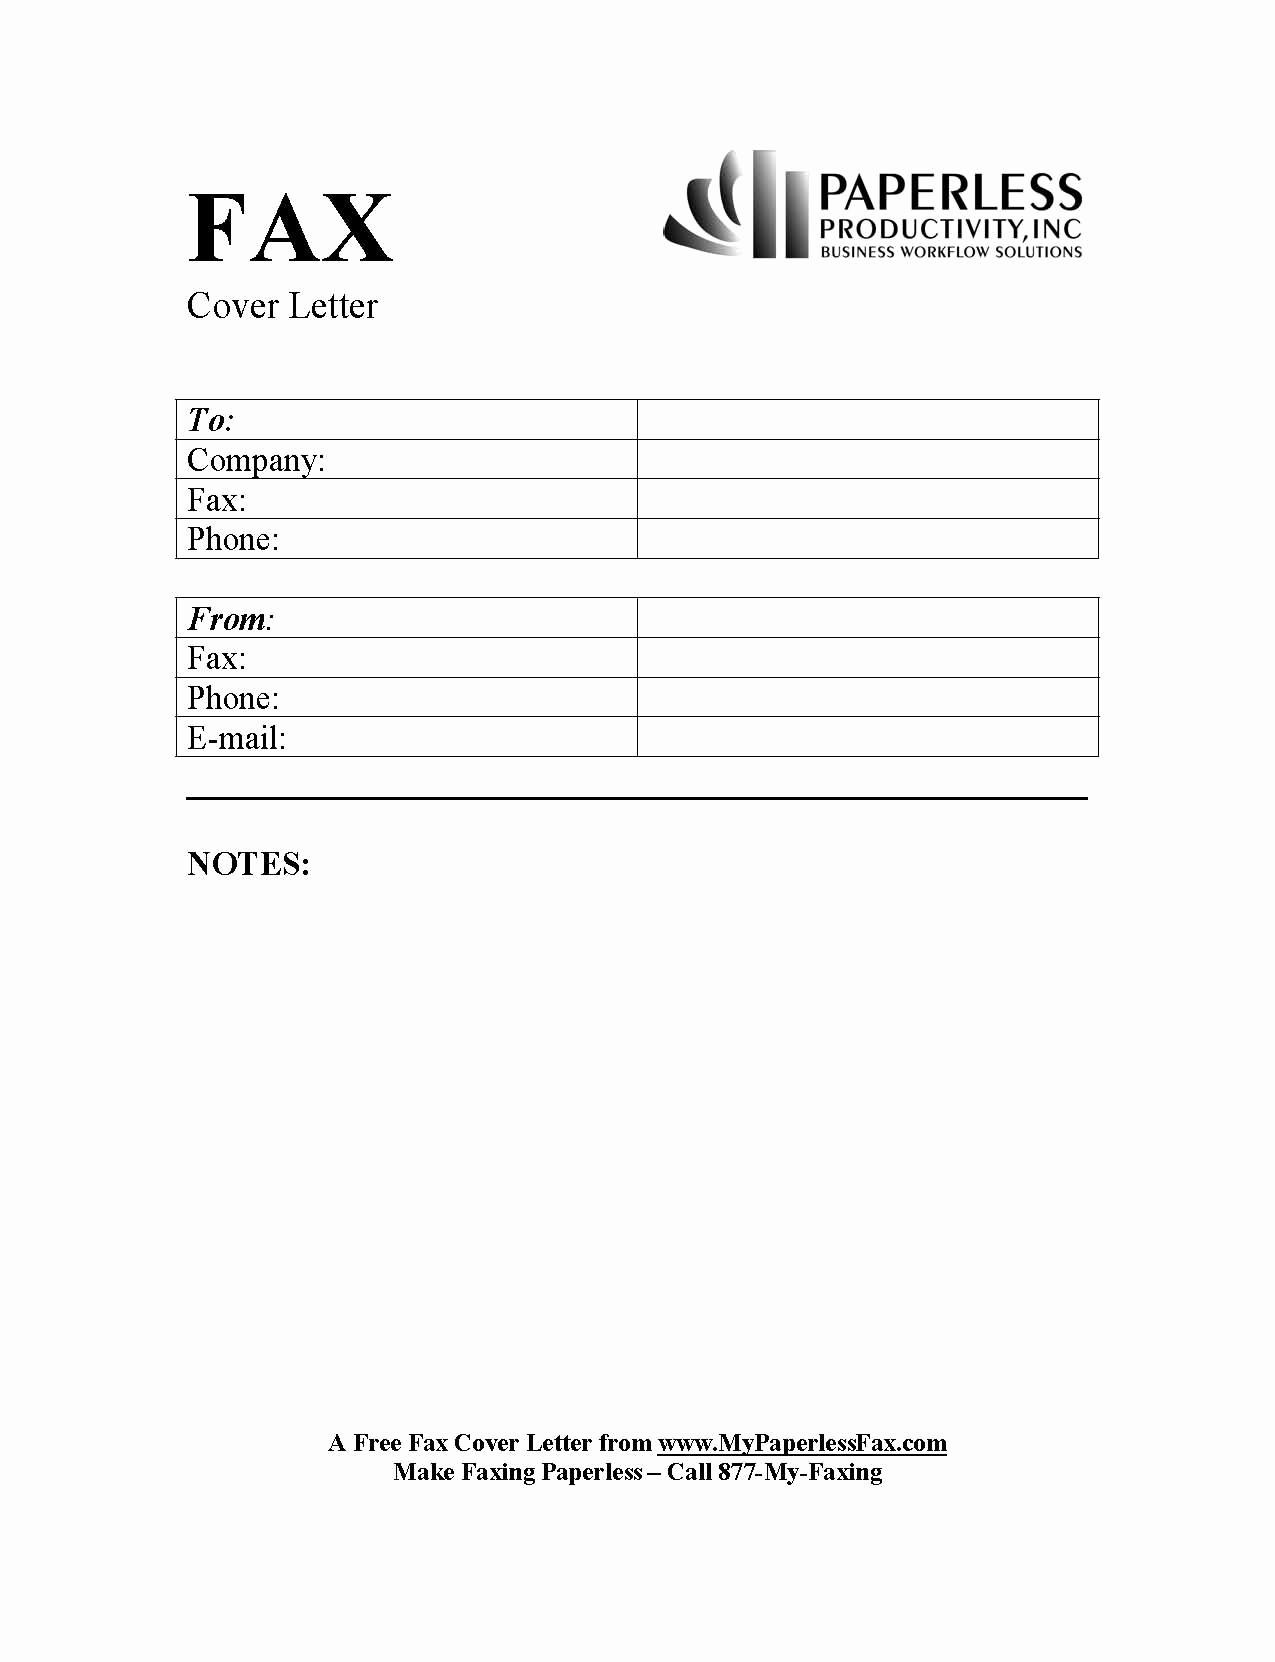 Free Fax Cover Letter Template New Microsoft Fice Fax Cover Sheet Template